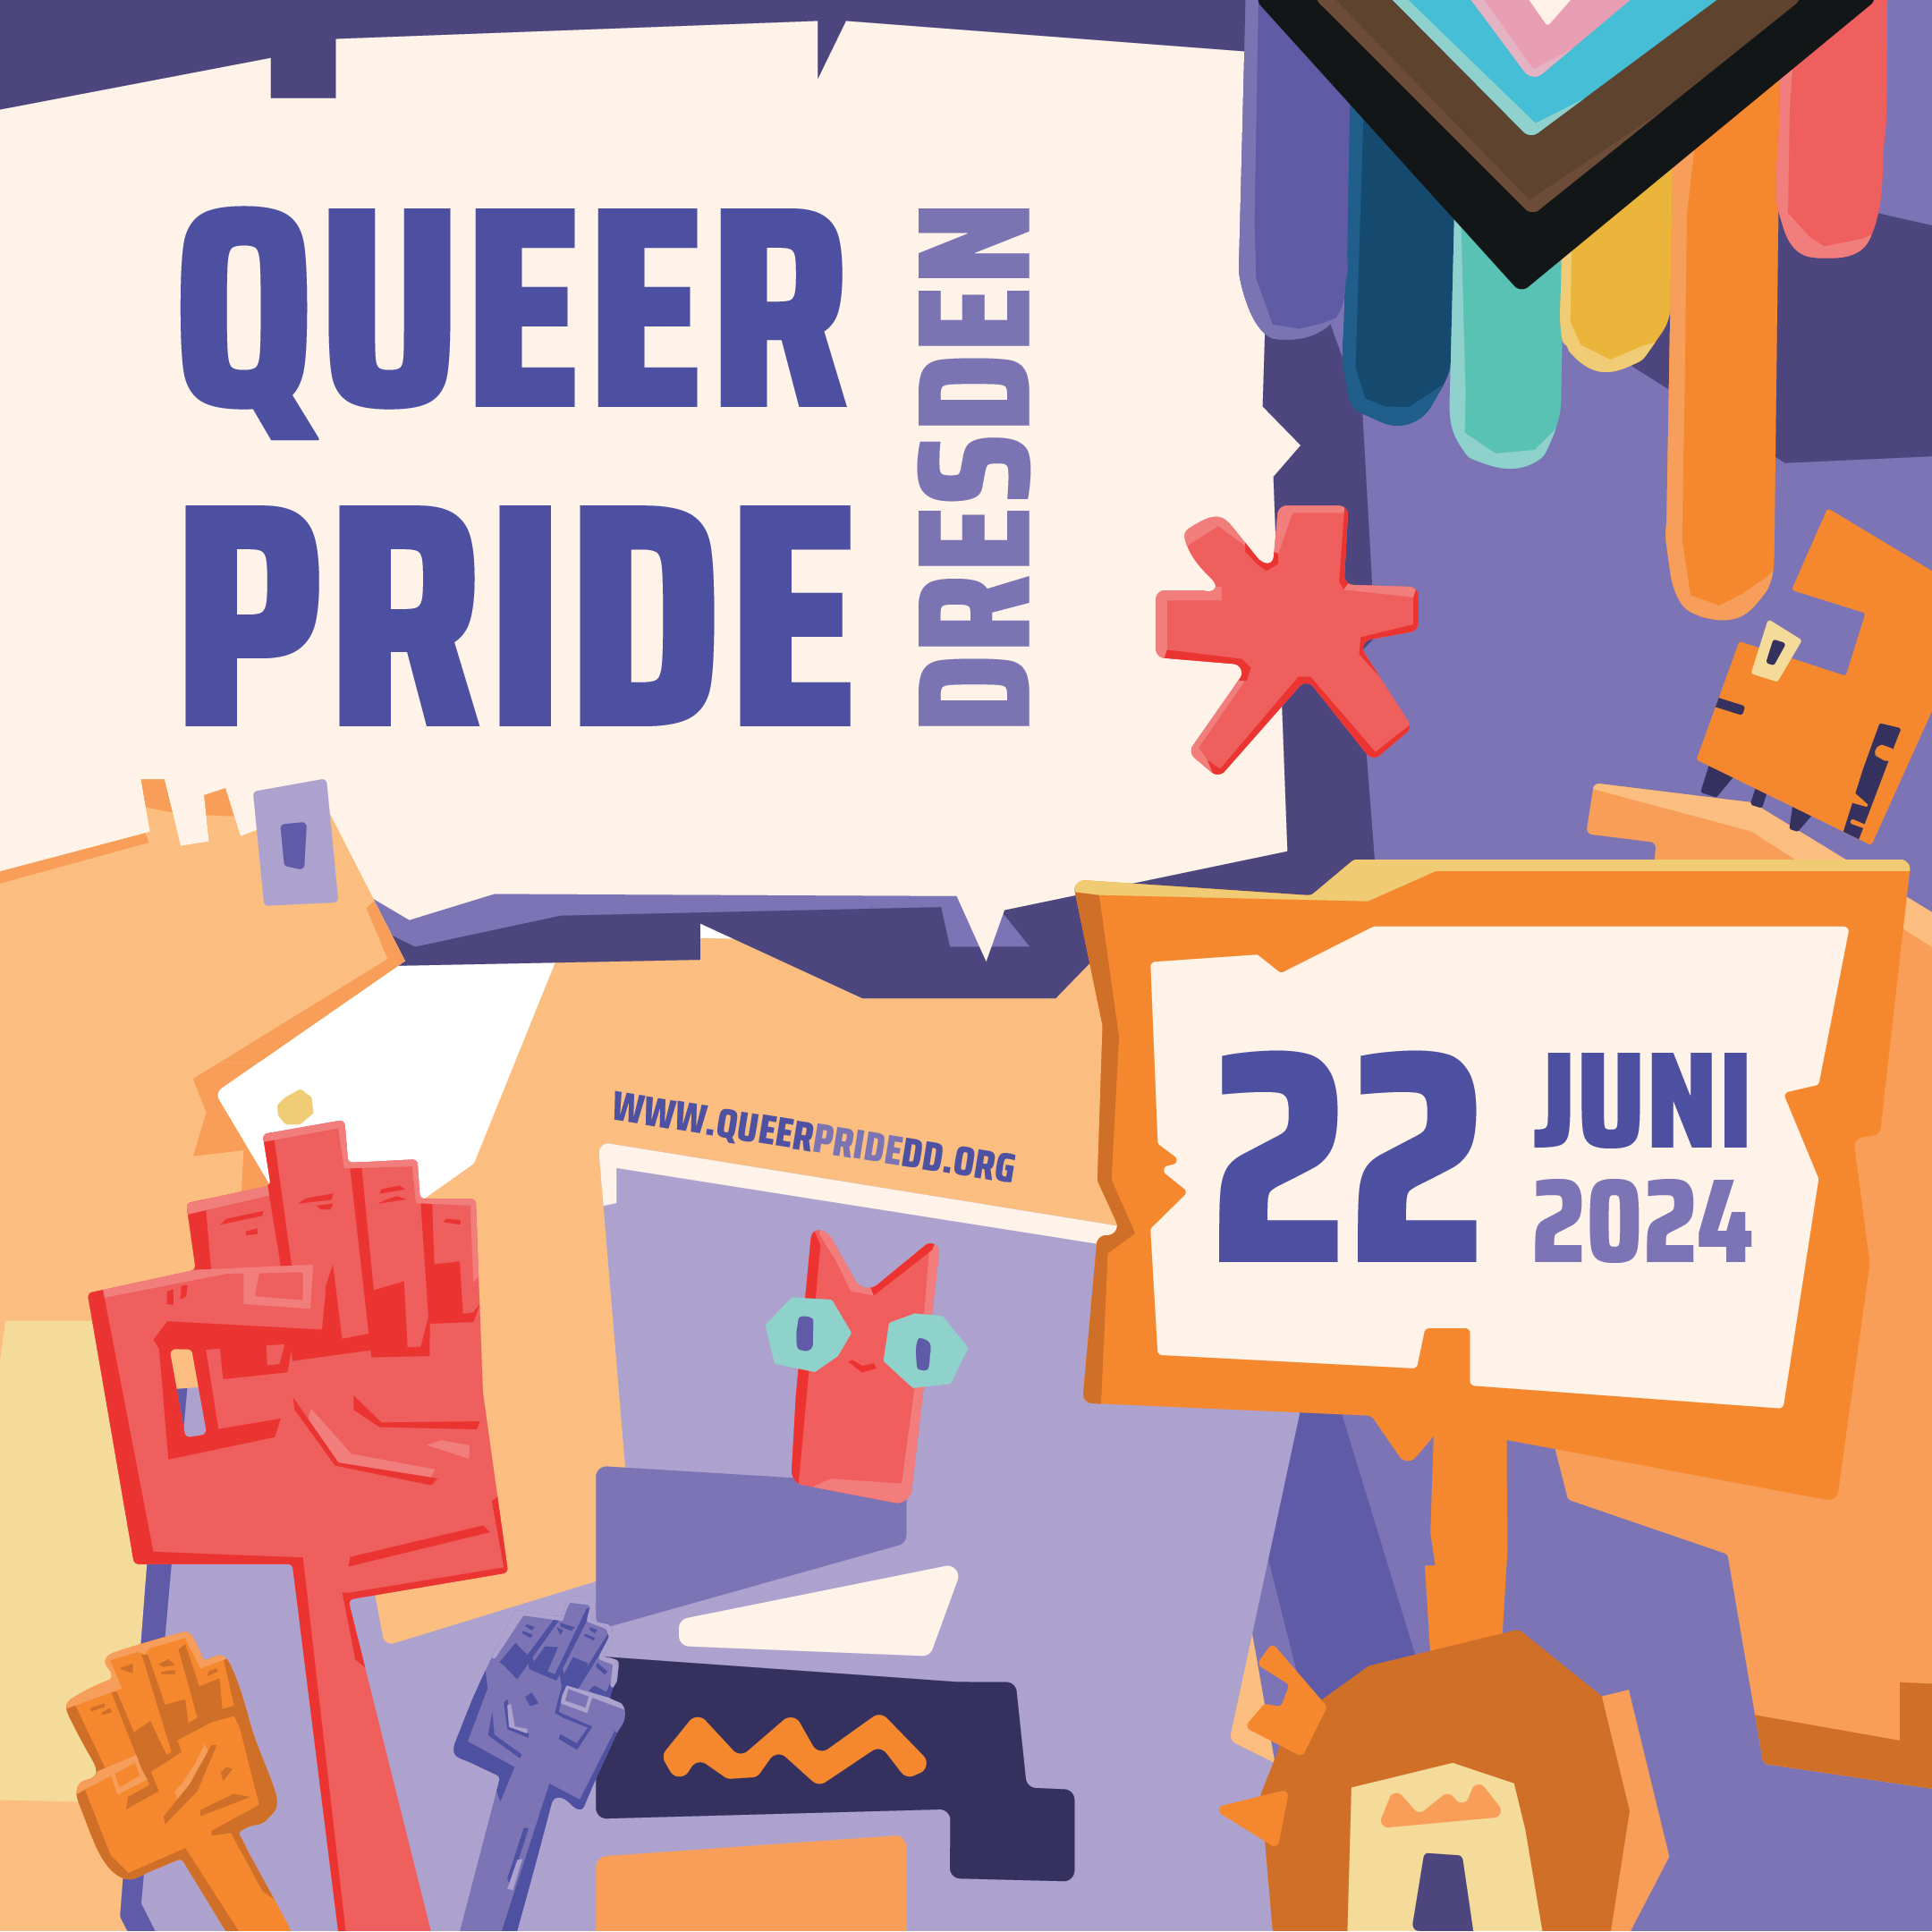 A colourful quadratic sharepic announcing Queer Pride Dresden for 22nd of June 2024. On the top right there is a progressive pride flag and below it the logo of Queer Pride Dresden (an asterisk) in red. In the background raised fists and stylized creatures. One is holding a sign with the date 22nd of June 2024 written on it.